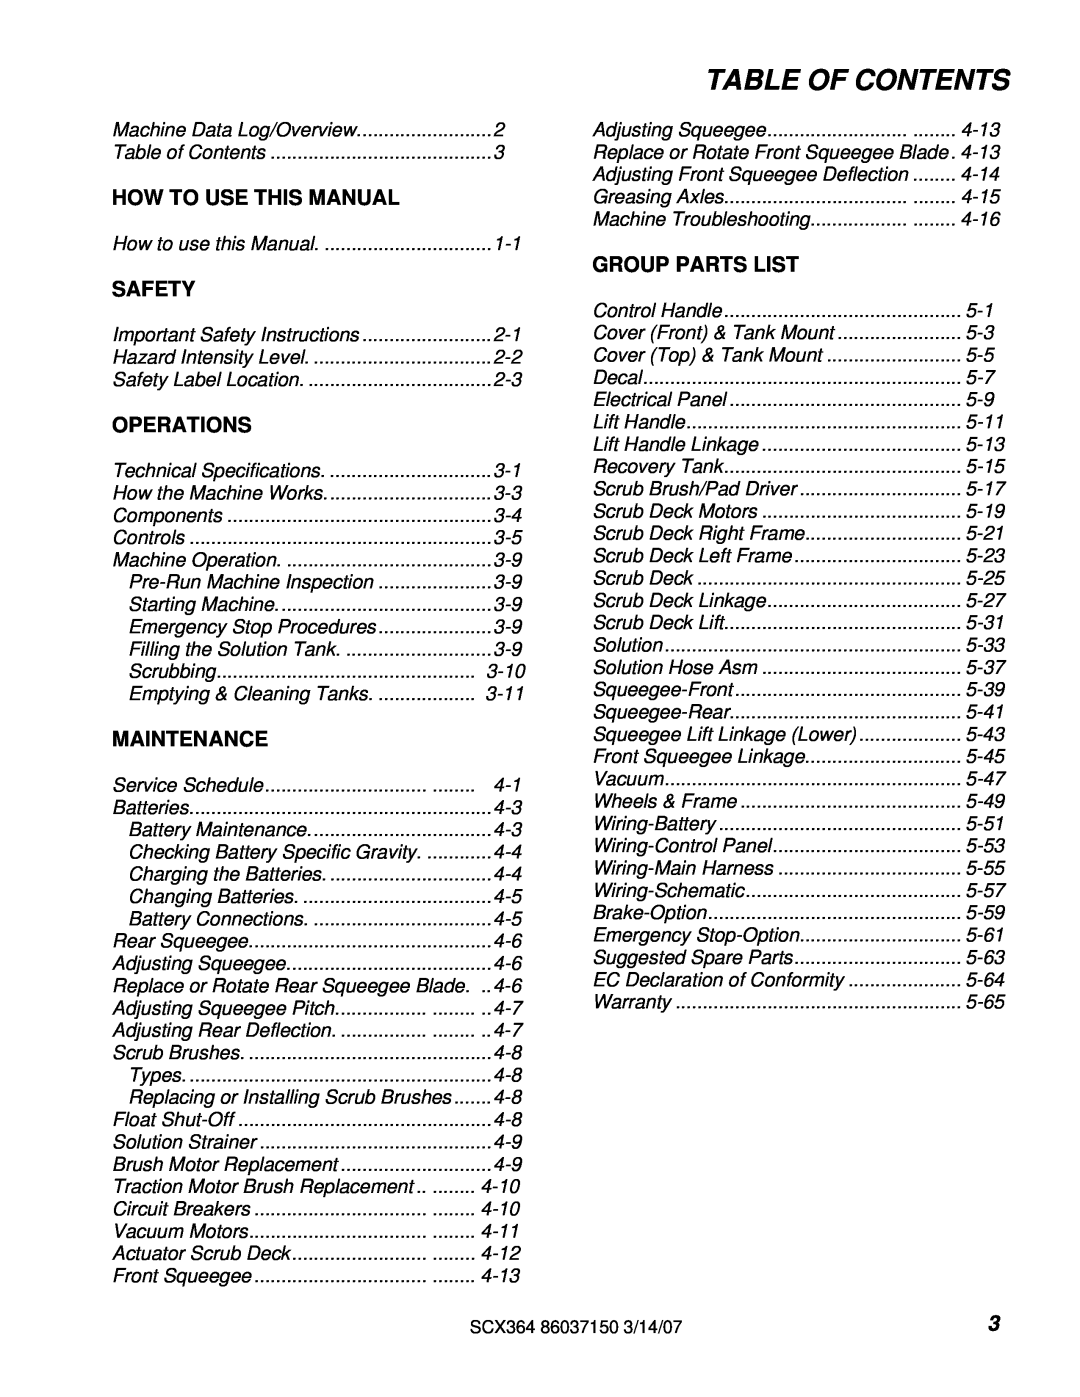 Windsor 10052410, SCX364 manual Table Of Contents, How To Use This Manual, Safety, Operations, Maintenance, Group Parts List 